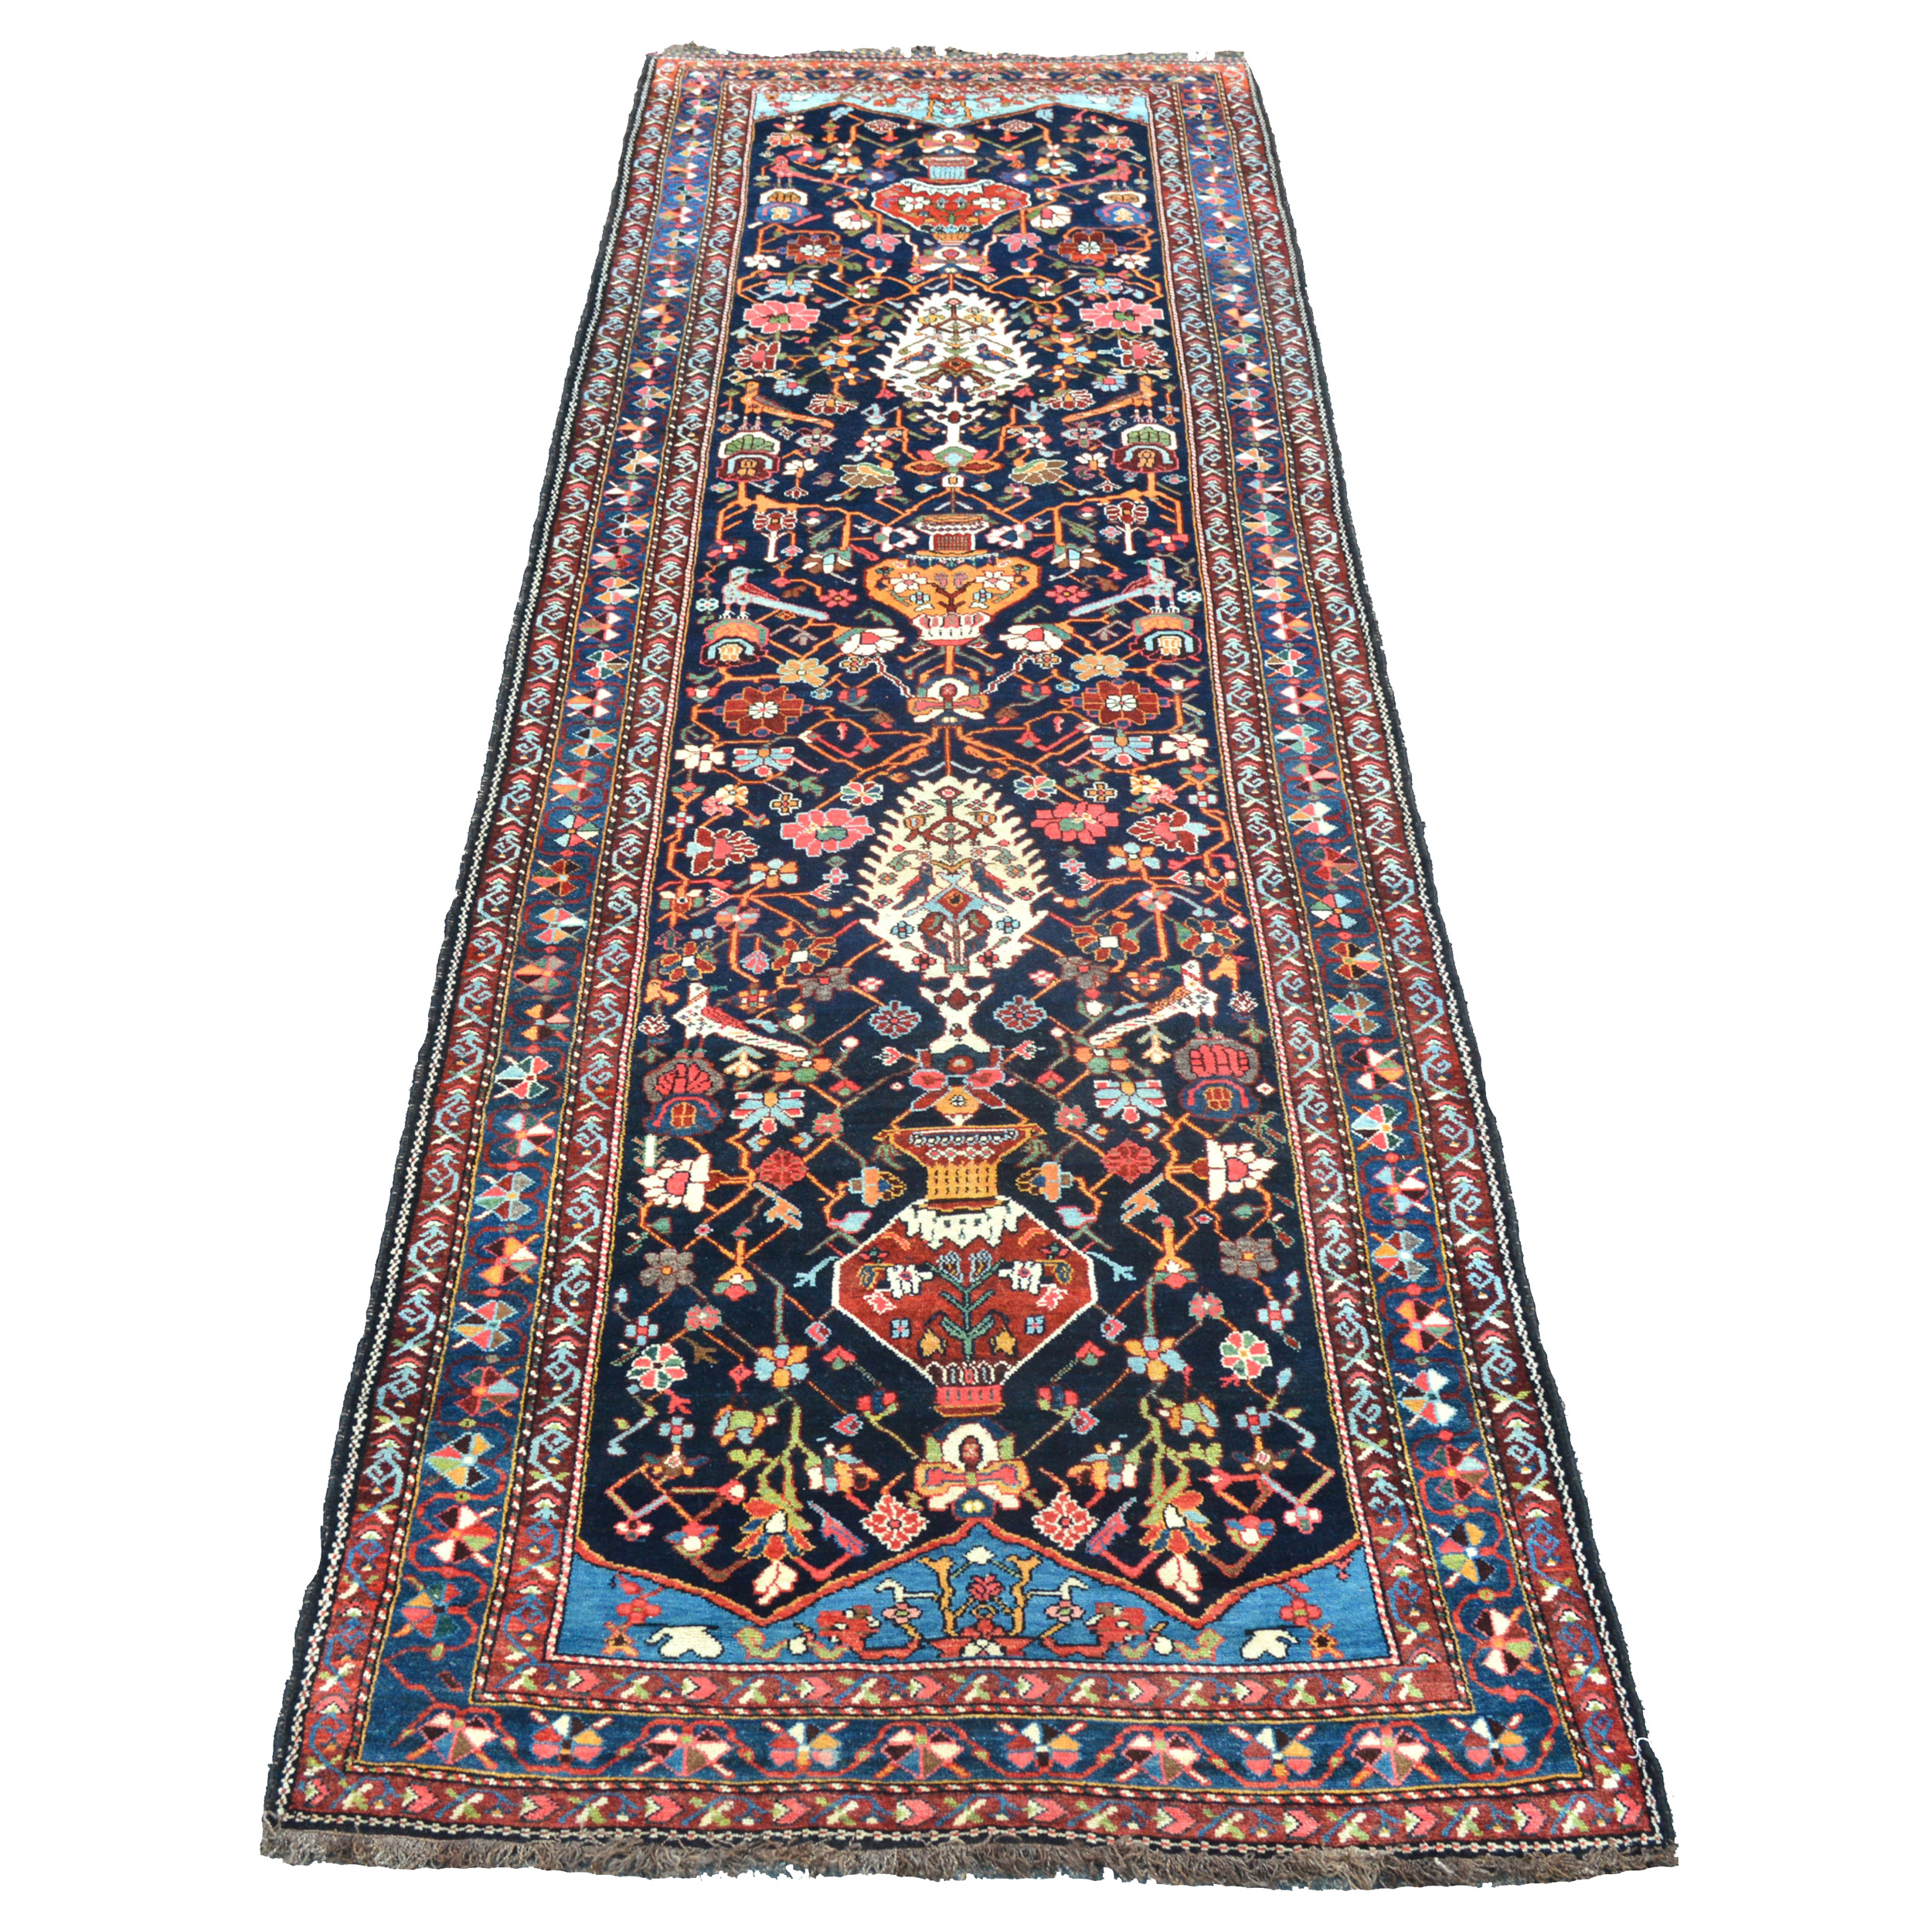 An exceptionally beautiful antique runner woven by the Bakhtiyari tribe in south Persia. The navy field is decorated with stylized flowers, vases and birds, Douglas Stock Gallery, antique Oriental rugs, antique runners, antique carpets Boston,MA area